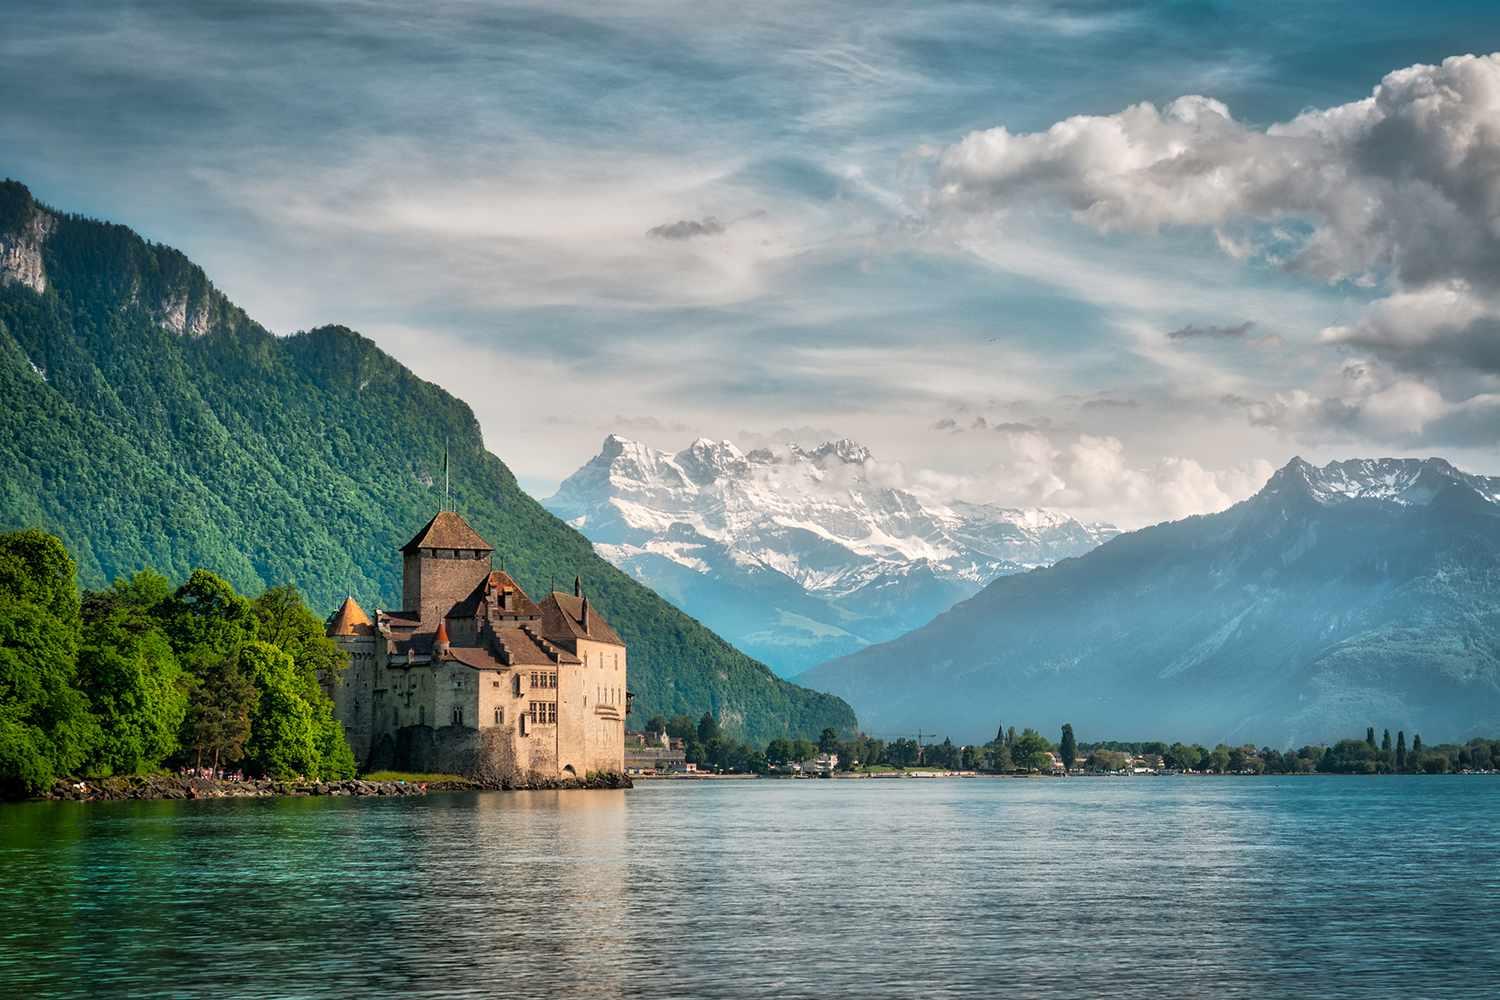 Figure 1: Scenery from Switzerland, source: https://www.travelandleisure.com/trip-ideas/nature-travel/most-naturally-beautiful-countries-in-the-world